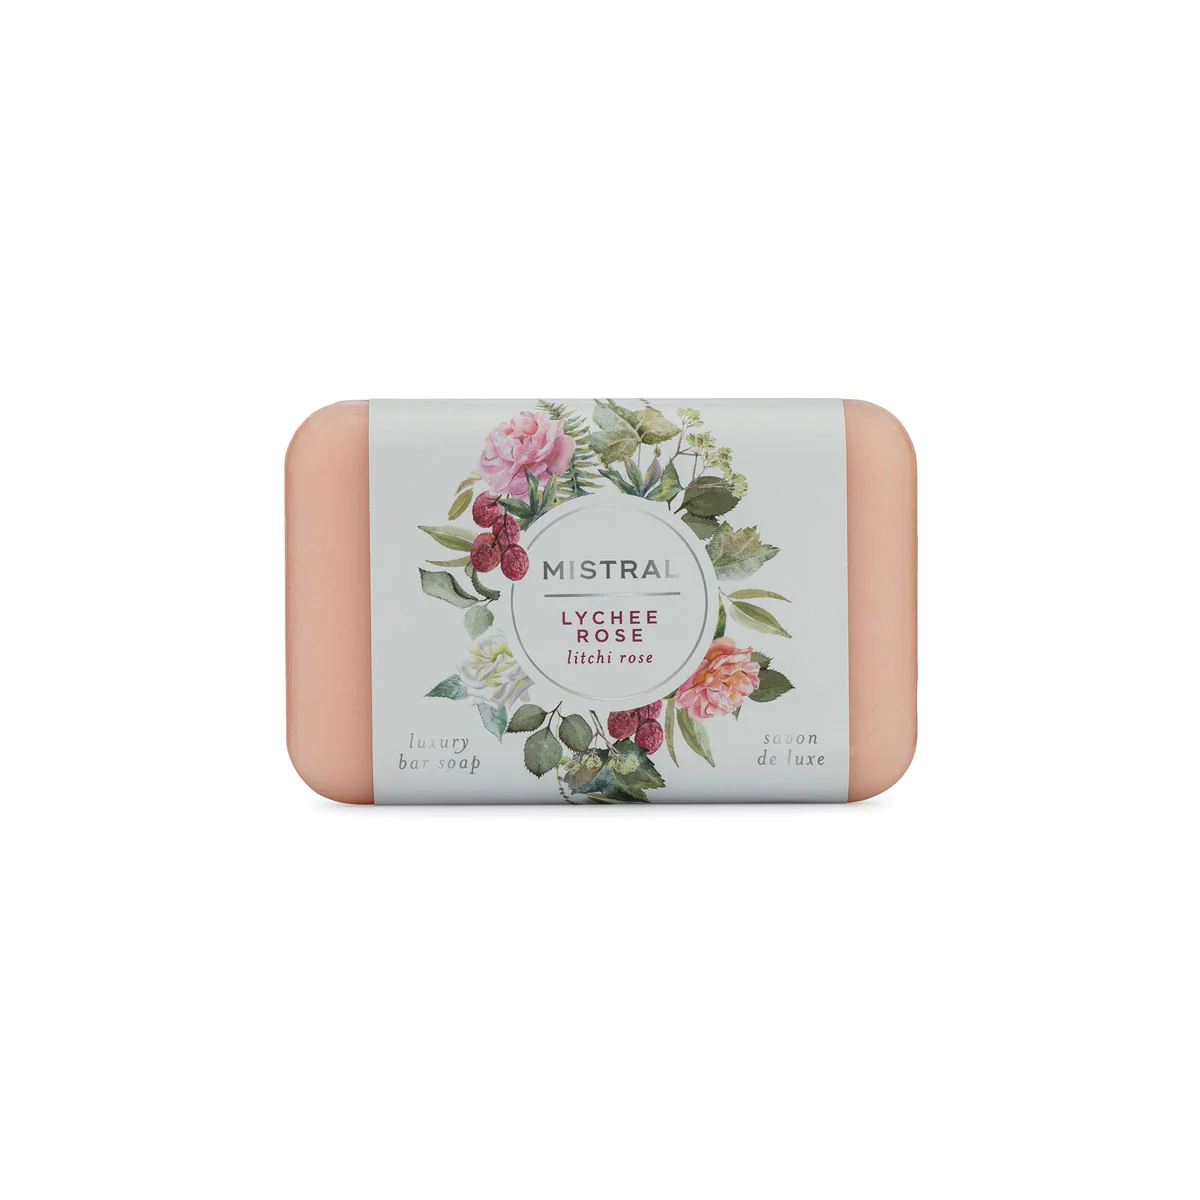 MINI LYCHEE ROSE CLASSIC BAR SOAP by MISTRAL